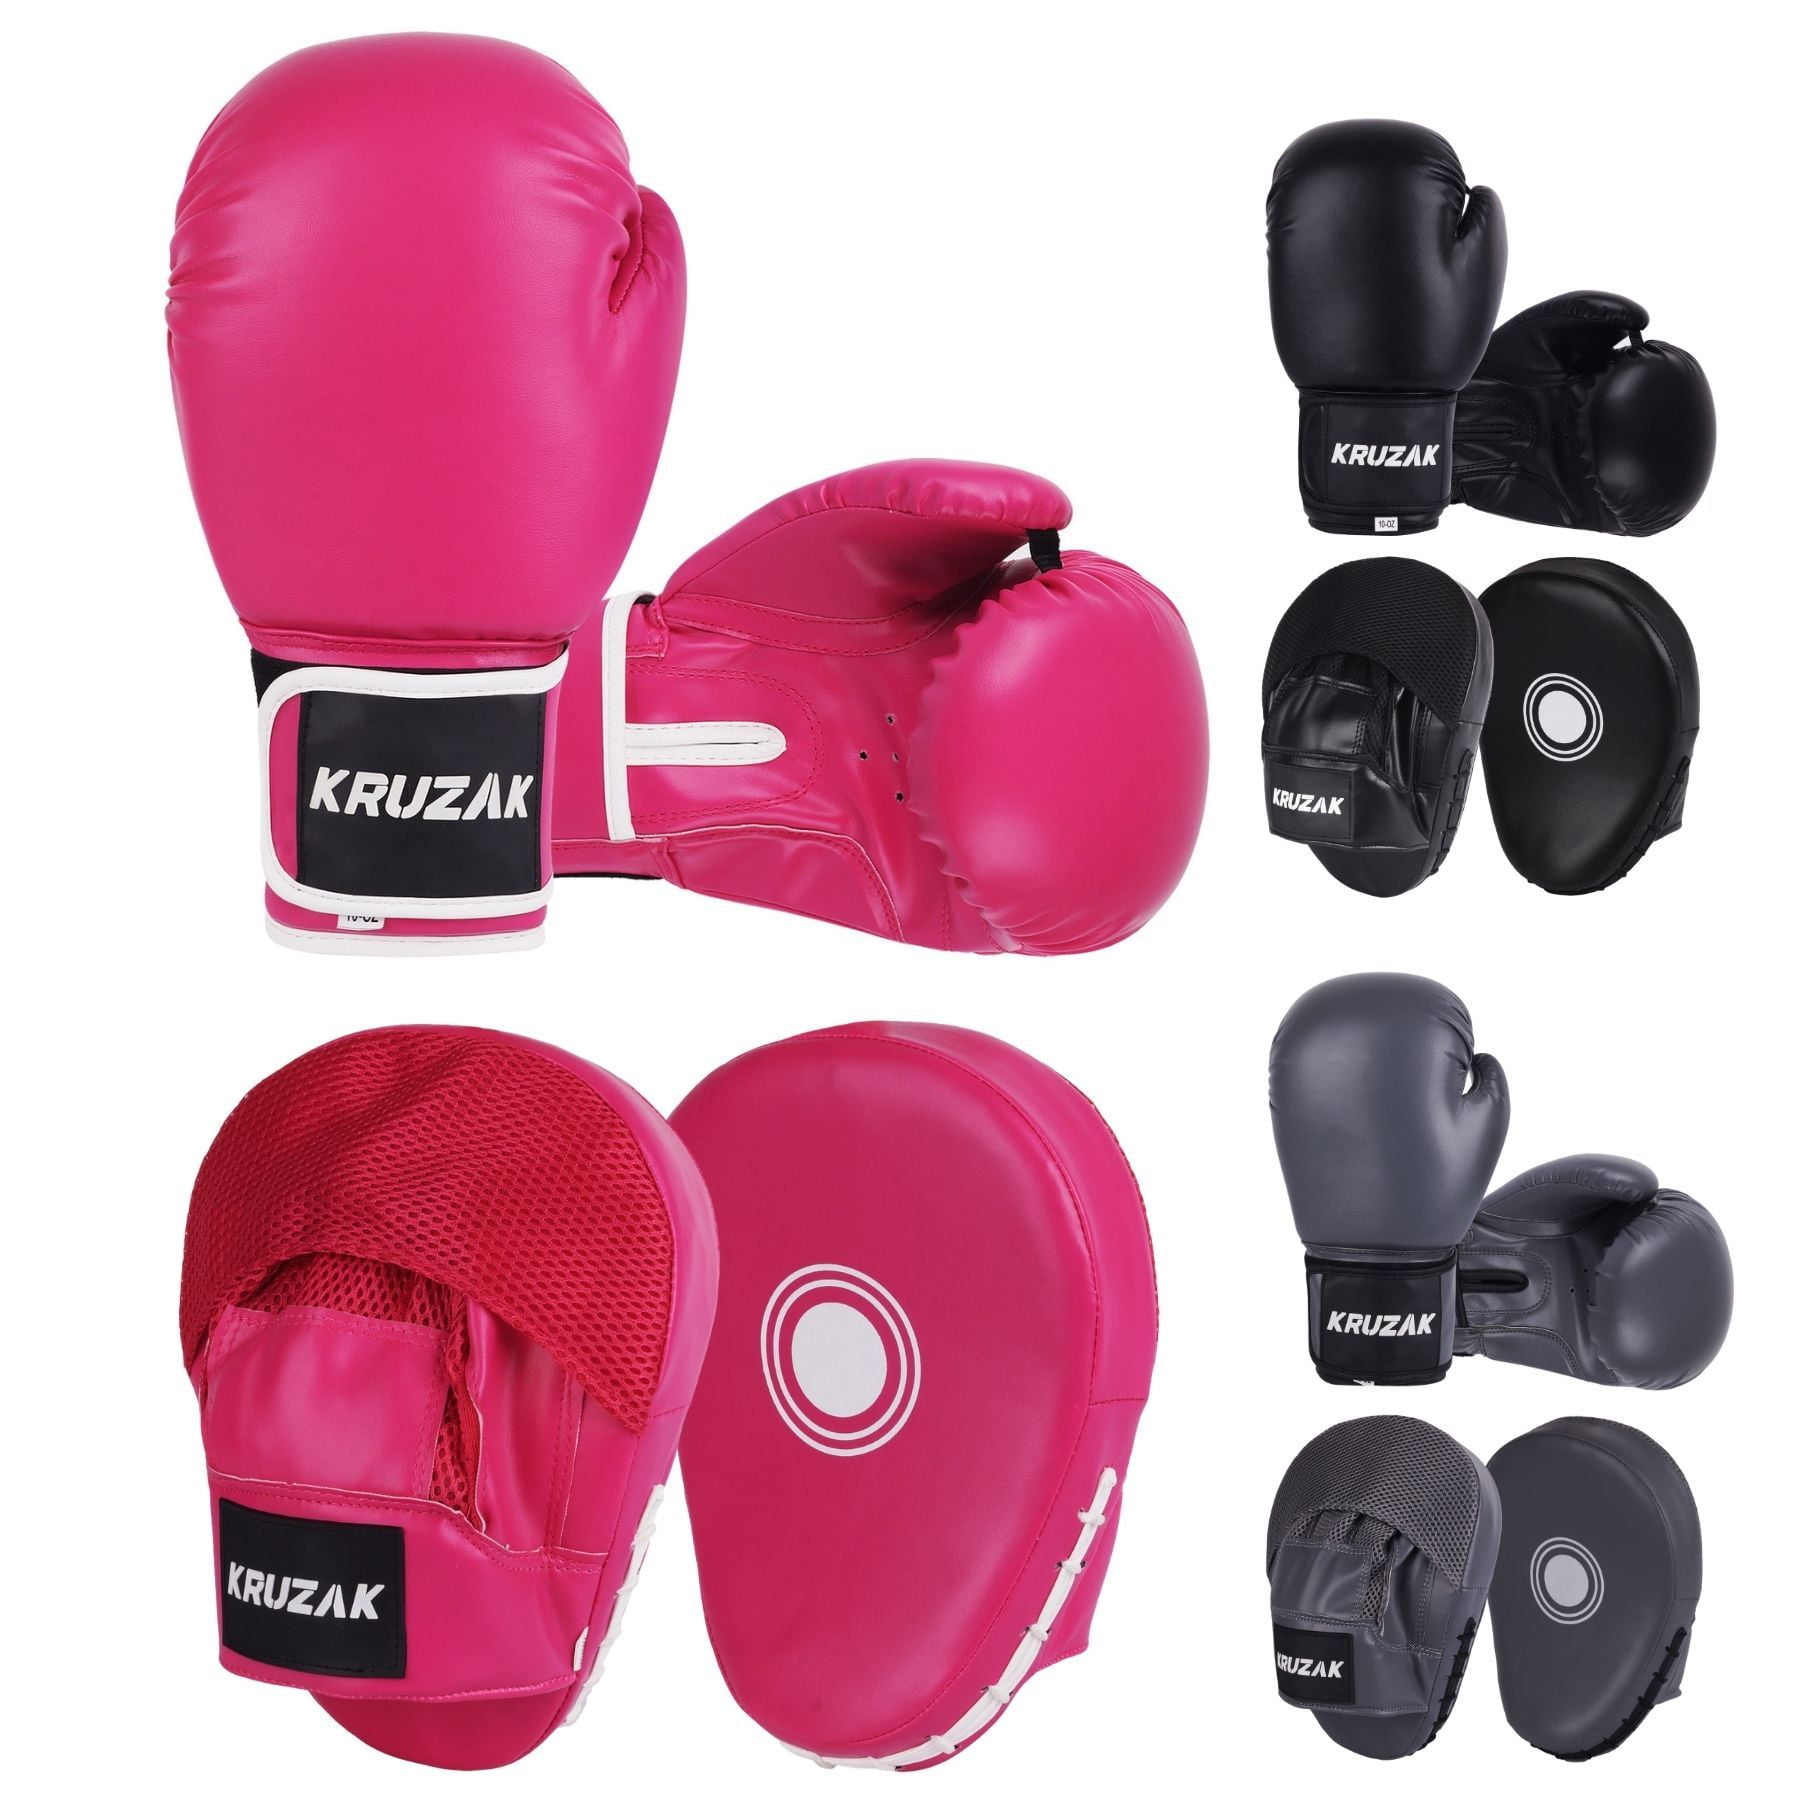 Training Gloves Kruzak Two-Tone Focus Mitts and Boxing Gloves Set for Kickboxing and Muay Thai MMA Training Fitness Kit for Martial Arts and Karate Focus Pads 